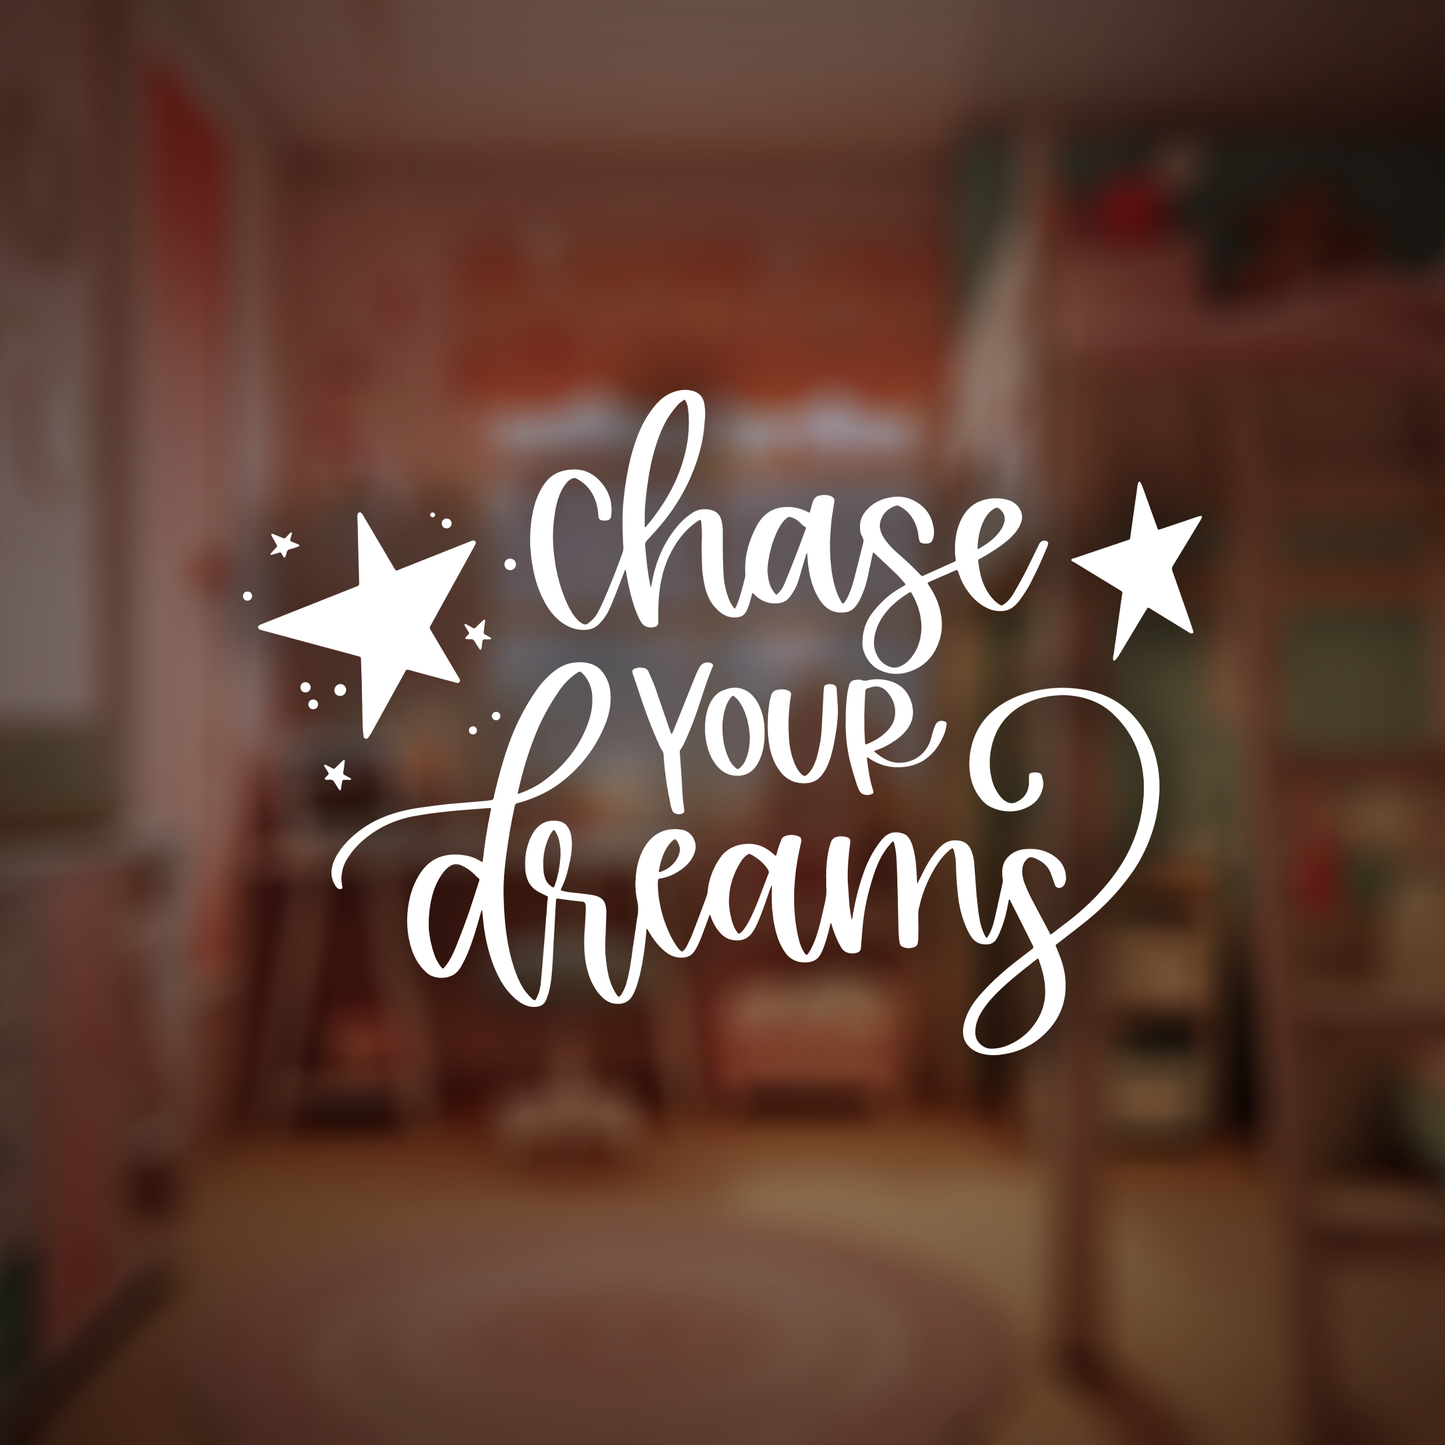 Chase Your Dreams Wall Sticker Decal